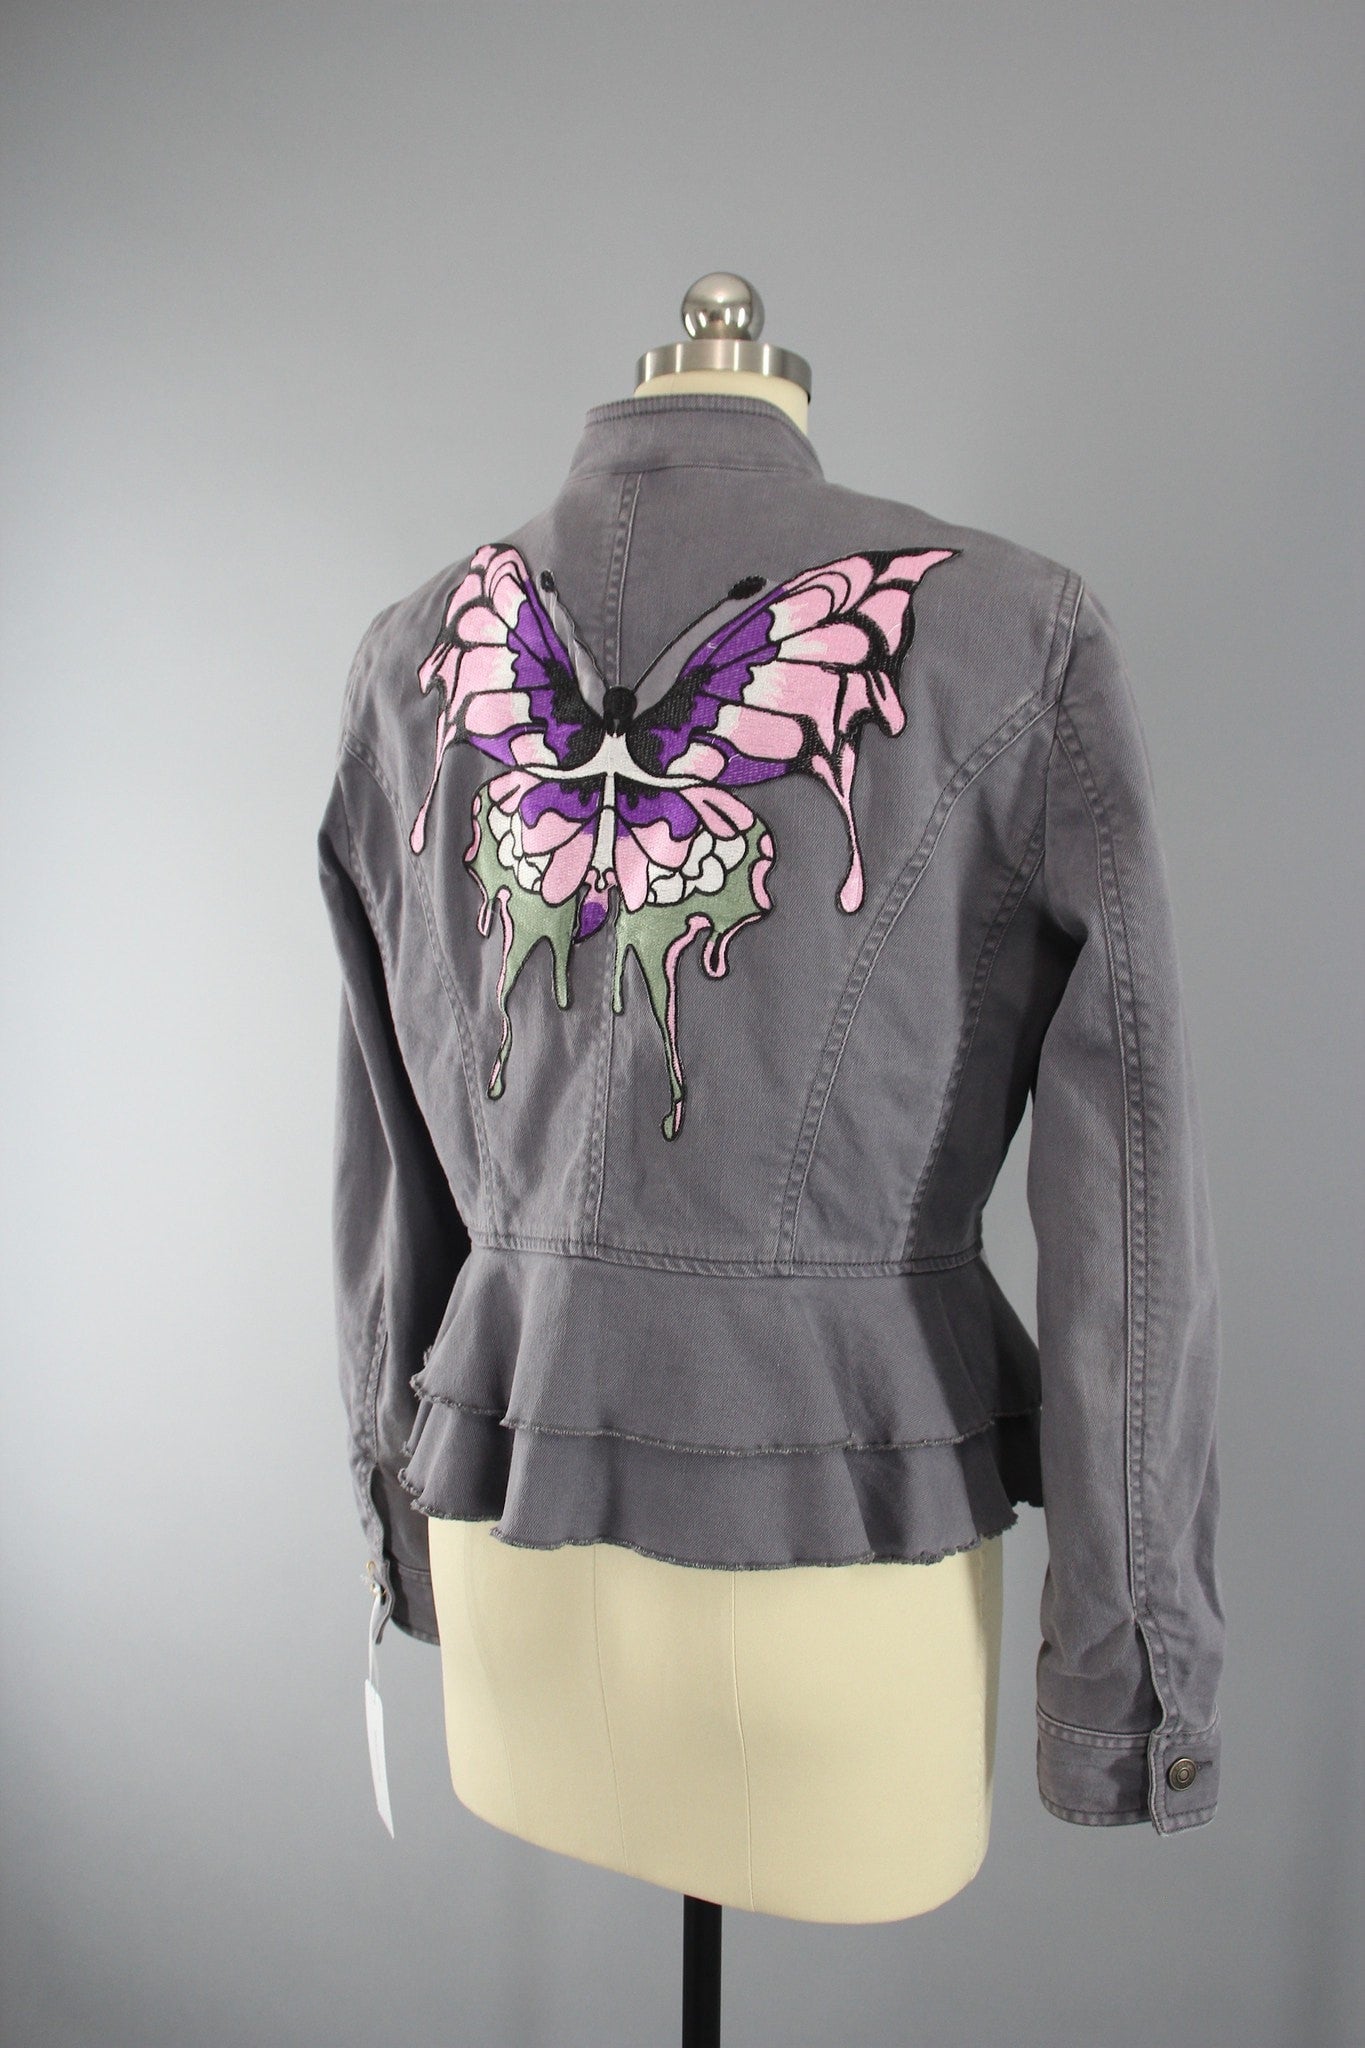 Grey Women's Jacket with BUTTERFLY Embroidery - ThisBlueBird